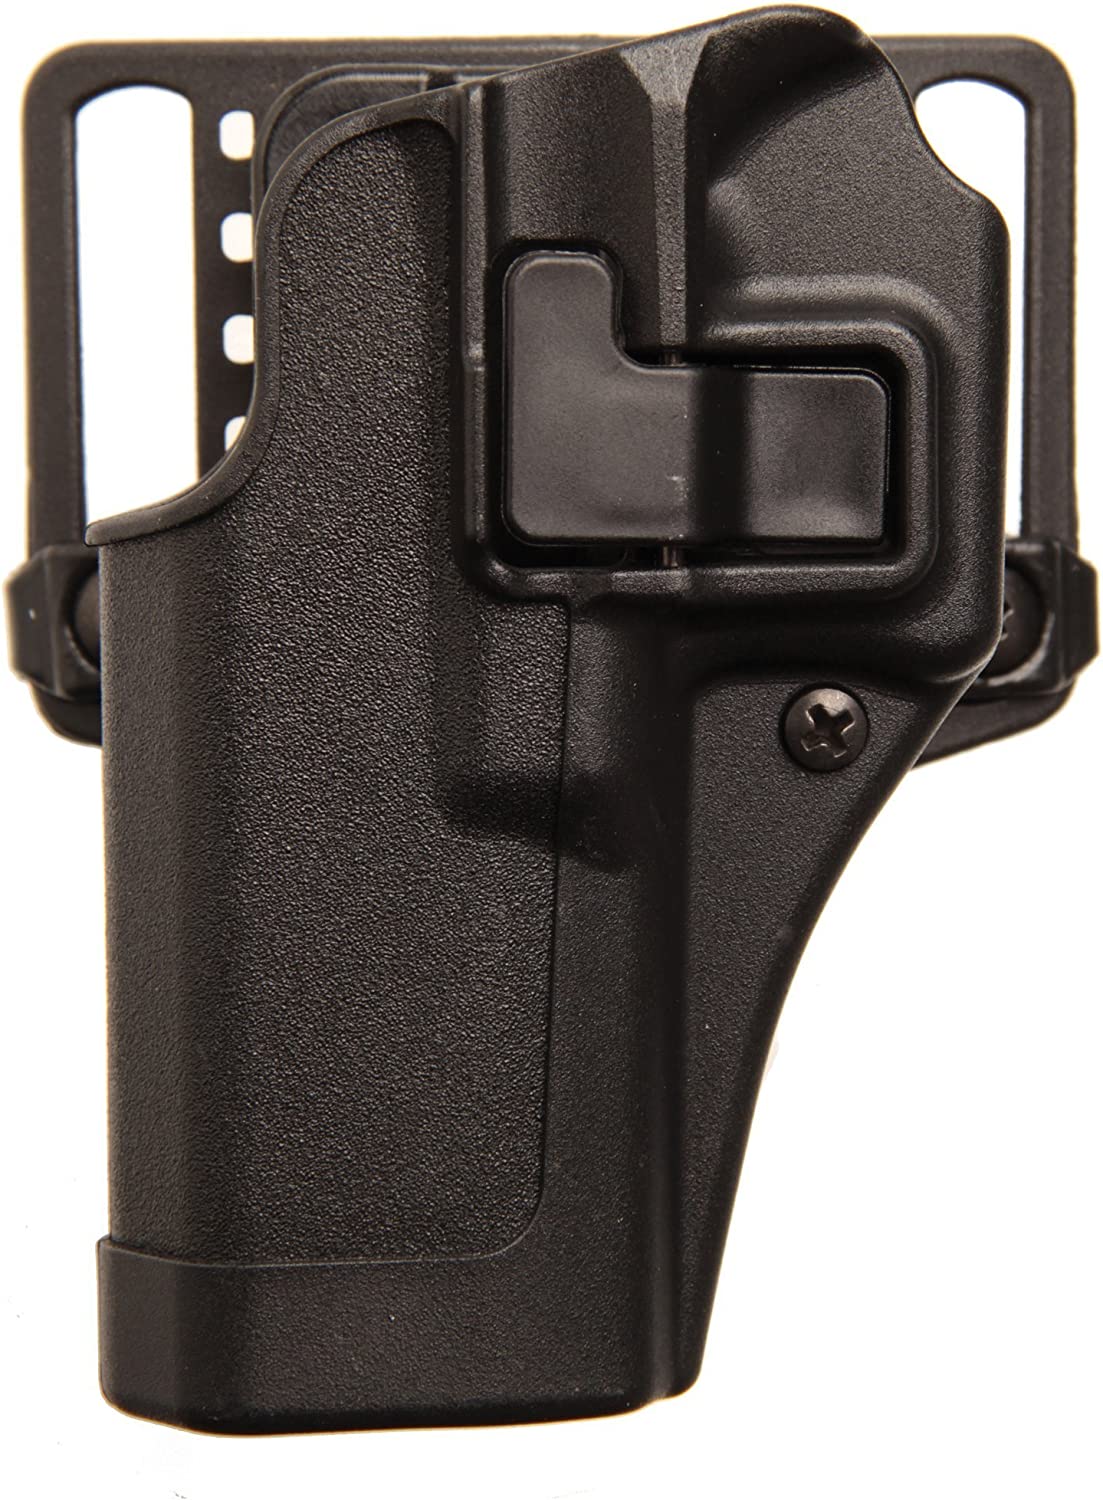 Blackhawk Serpa Concealment Holster - Matte Finish  Size 32  Right Hand  (Taurus 85 series 2" .38 (some)